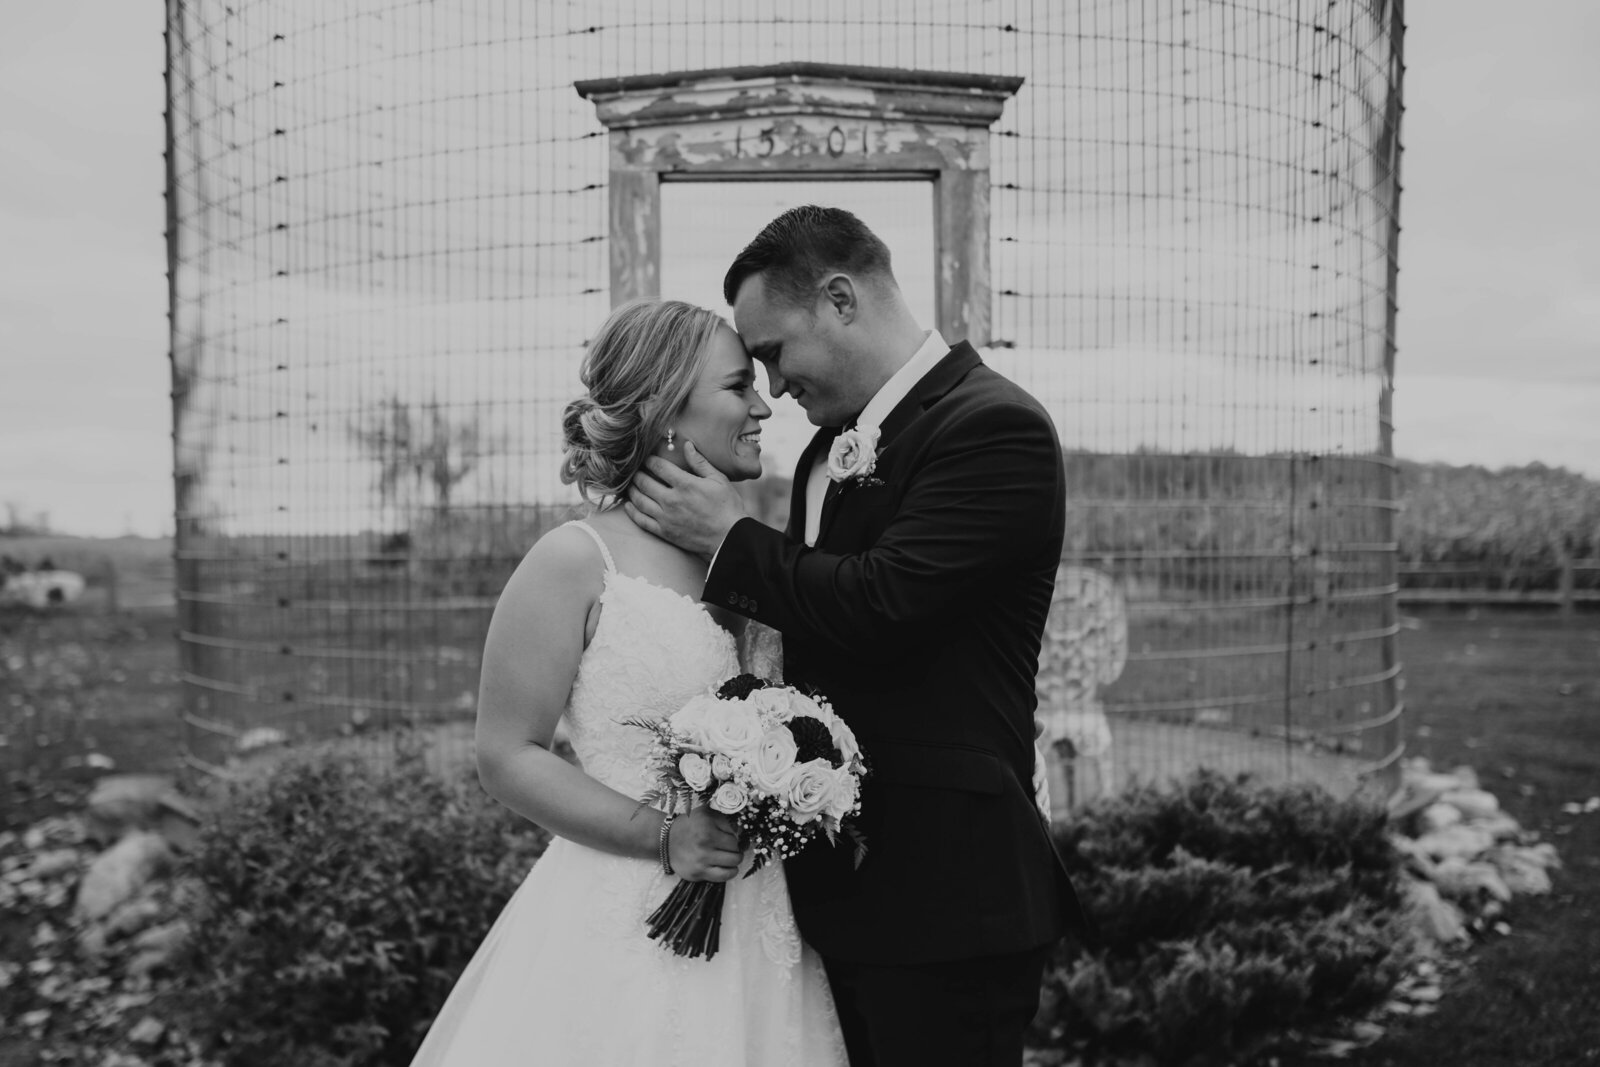 black and white photo of bride and groom looking at each other smiling while she hold her bouquet of flowers